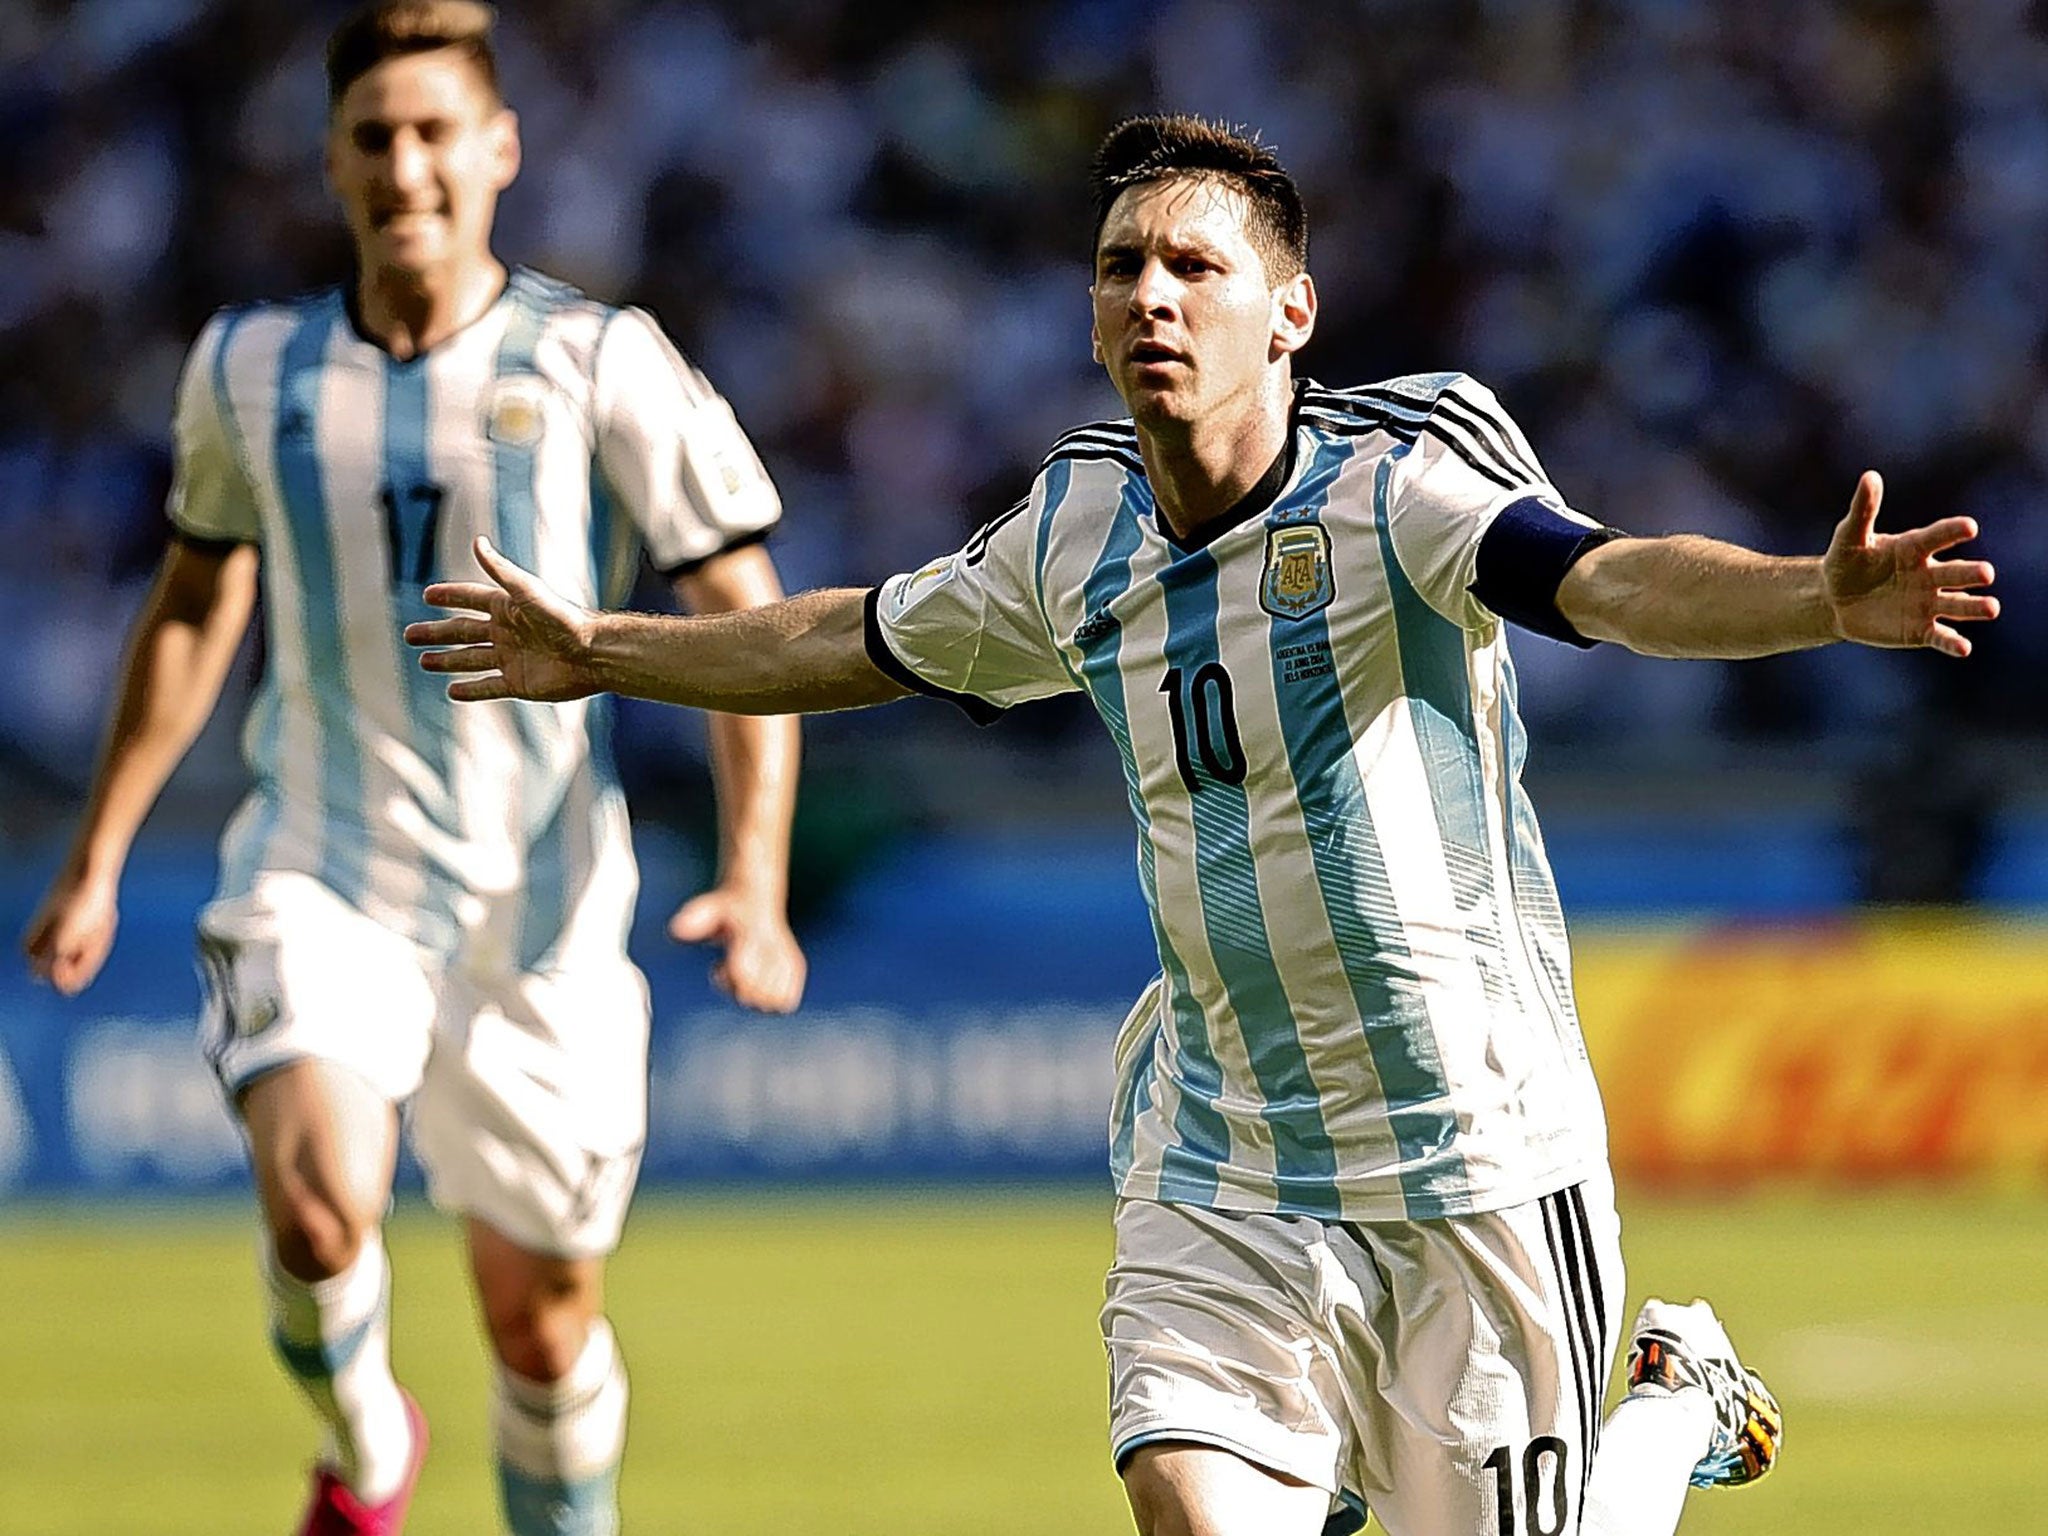 Happy ending: Lionel Messi is jubilant and relieved as he scores the goal in Belo Horizonte yesterday that put Argentina into the knockout stages